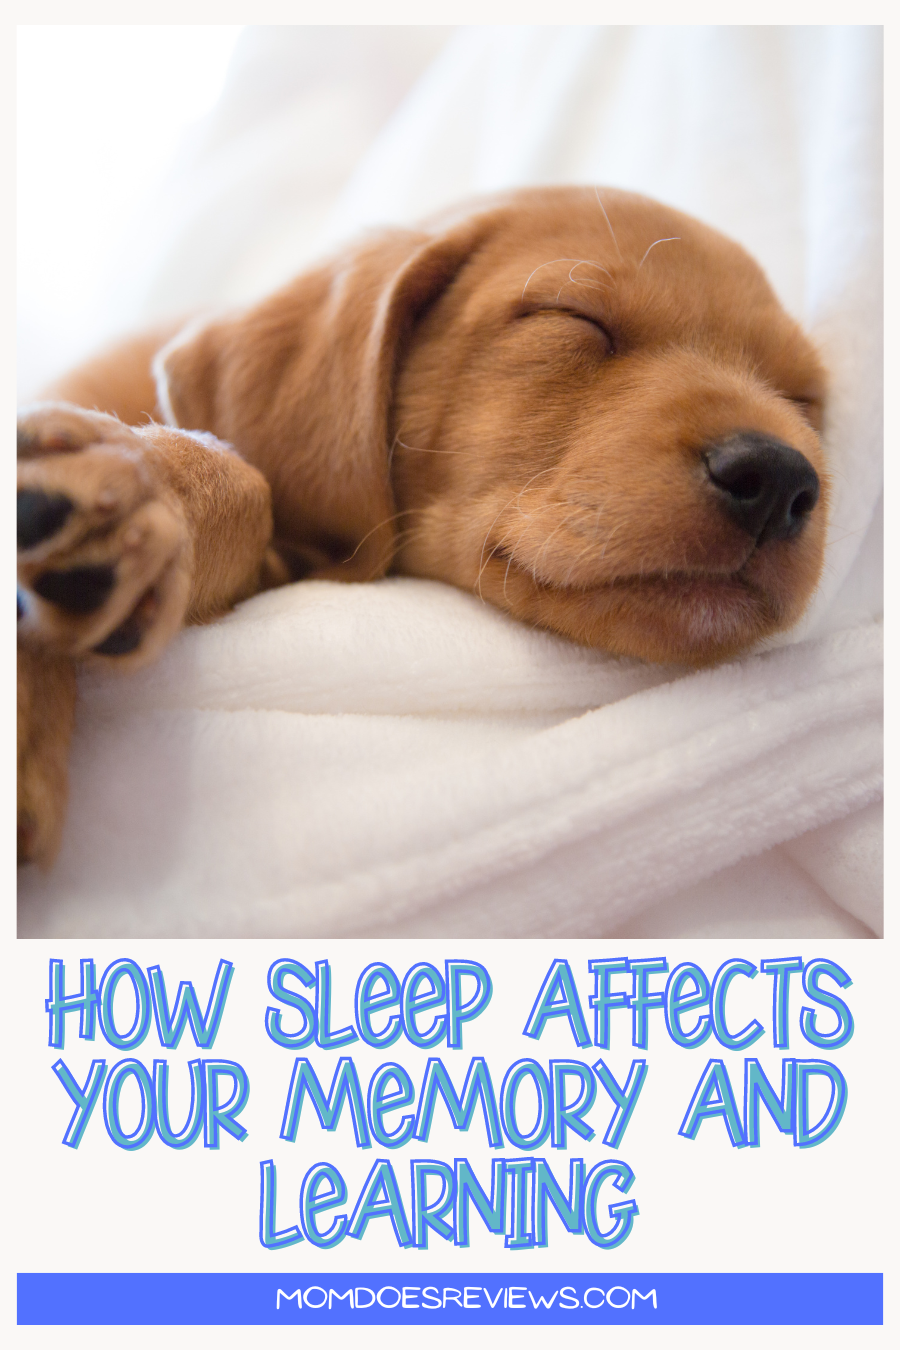 How Sleep Affects Your Memory and Learning